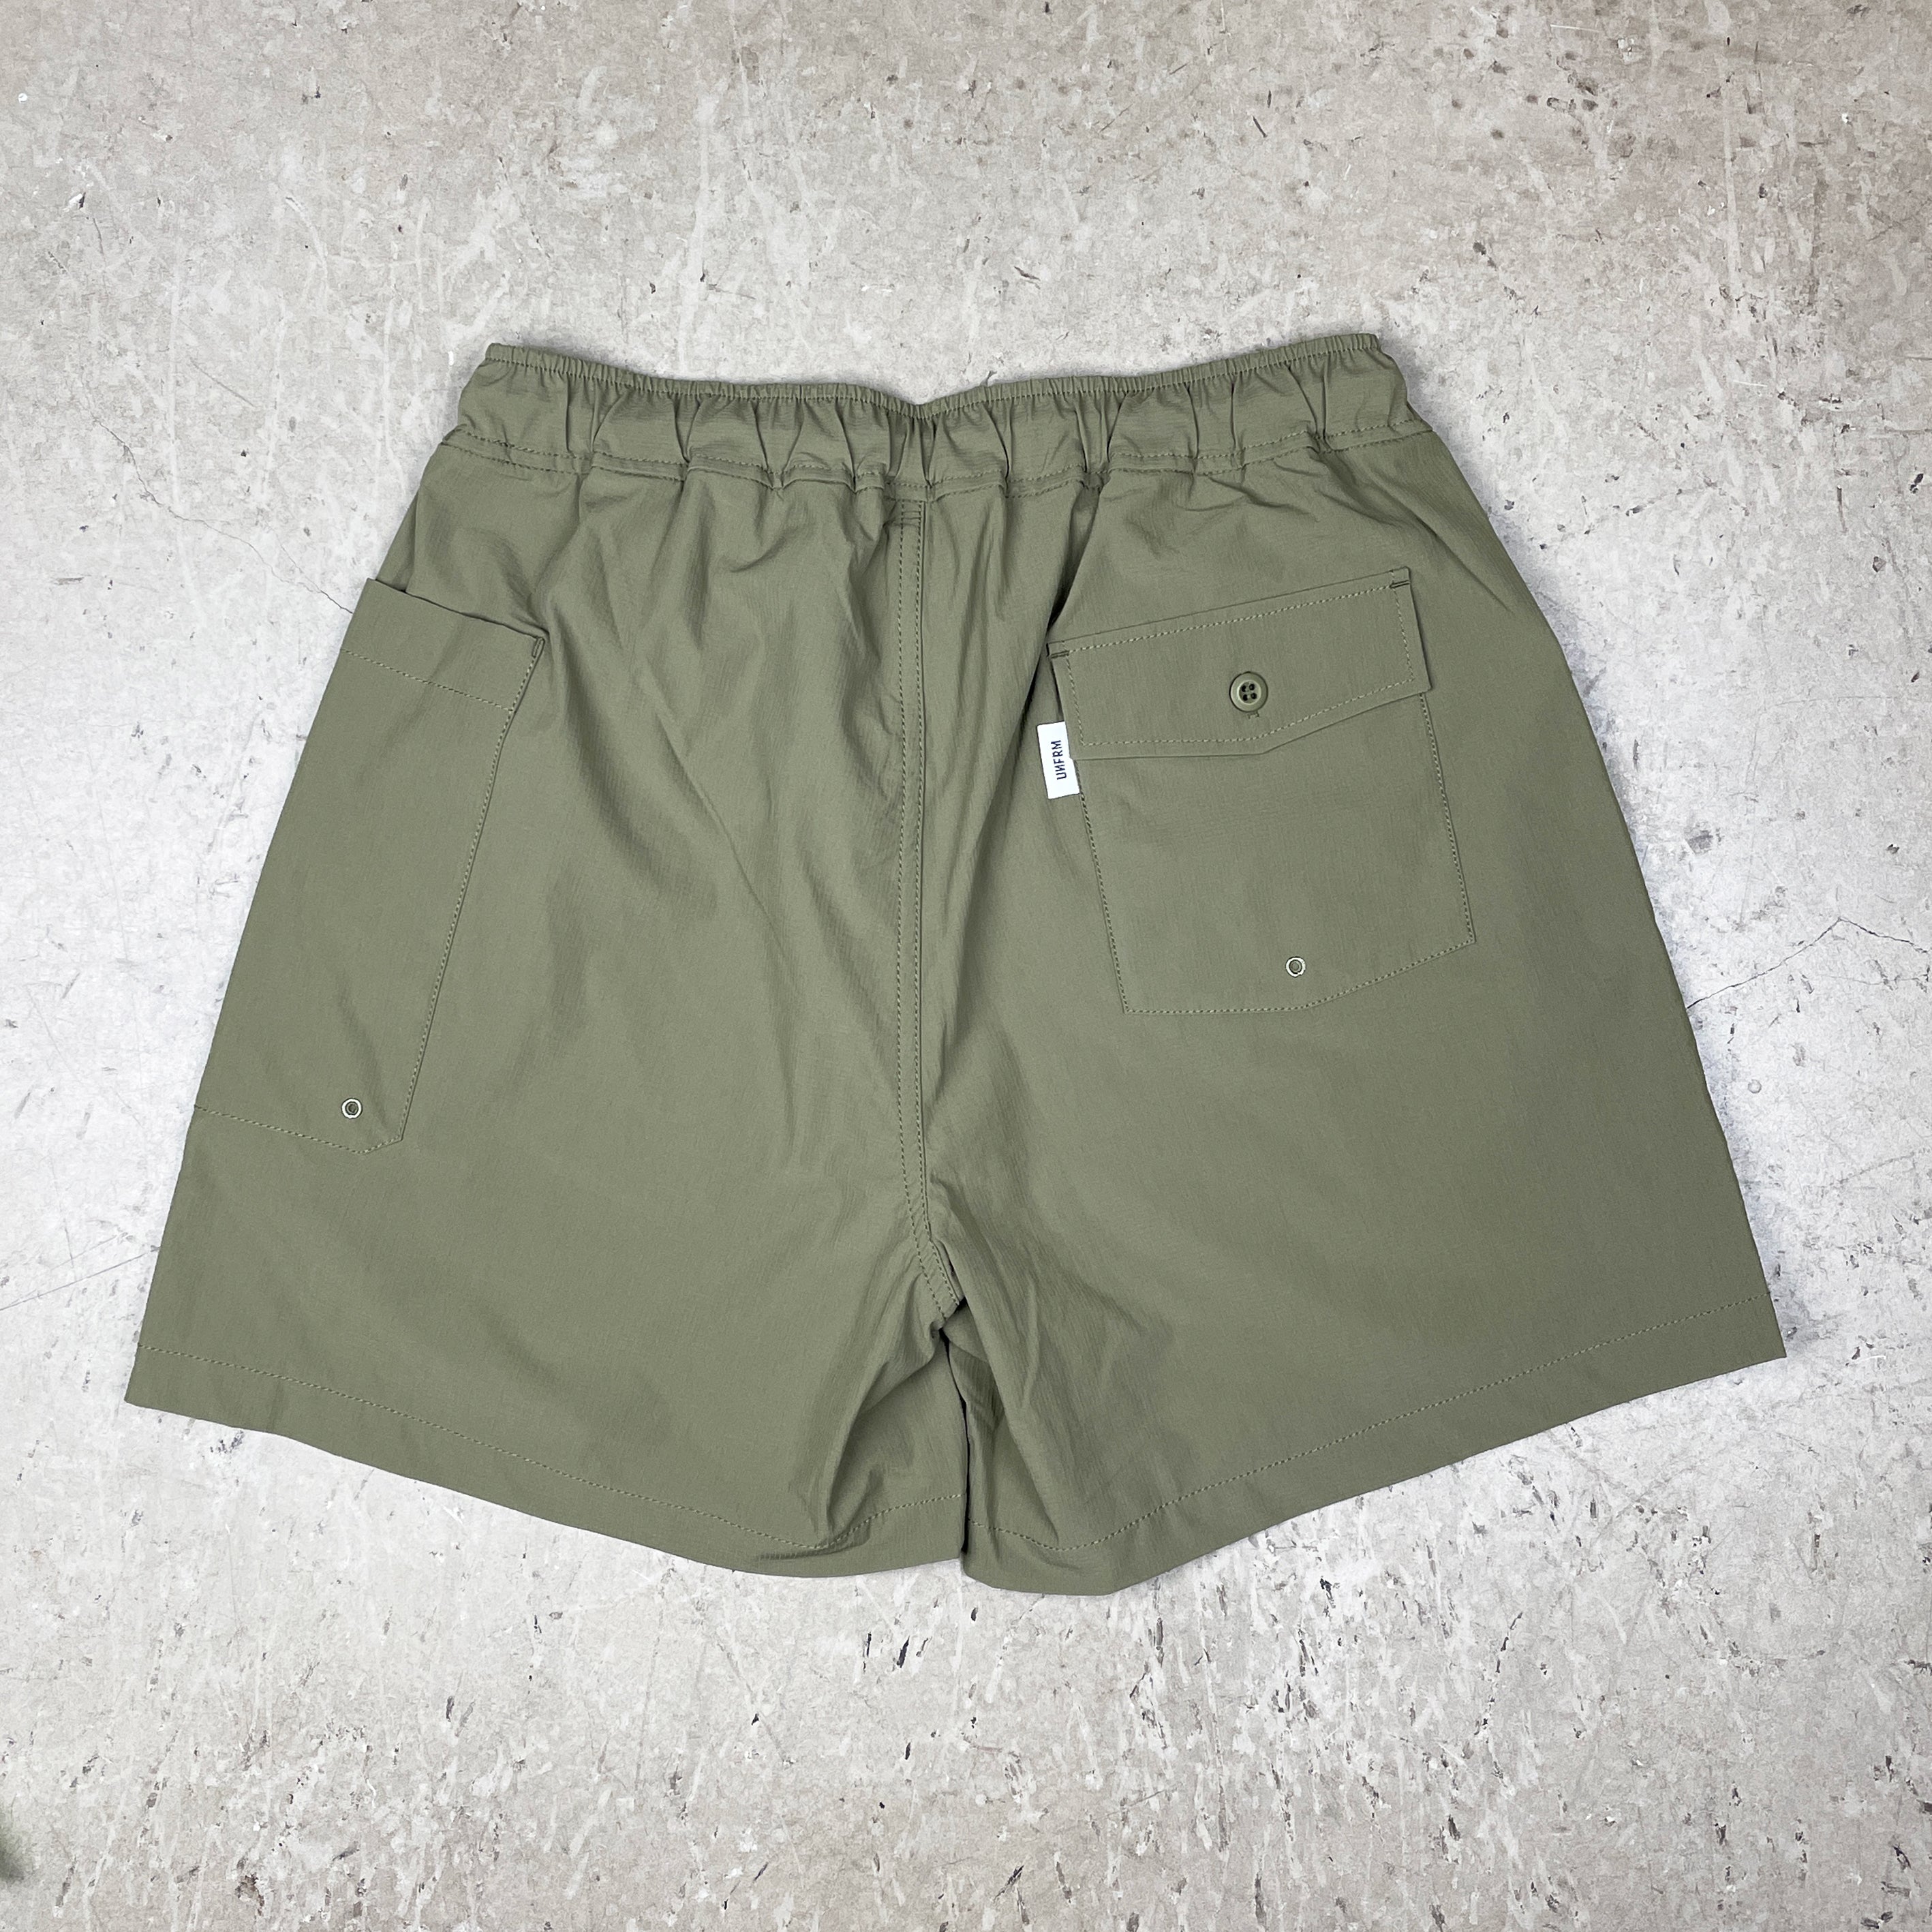 US NAVY 2WAY DRY STRETCH BAGGY SHORTS